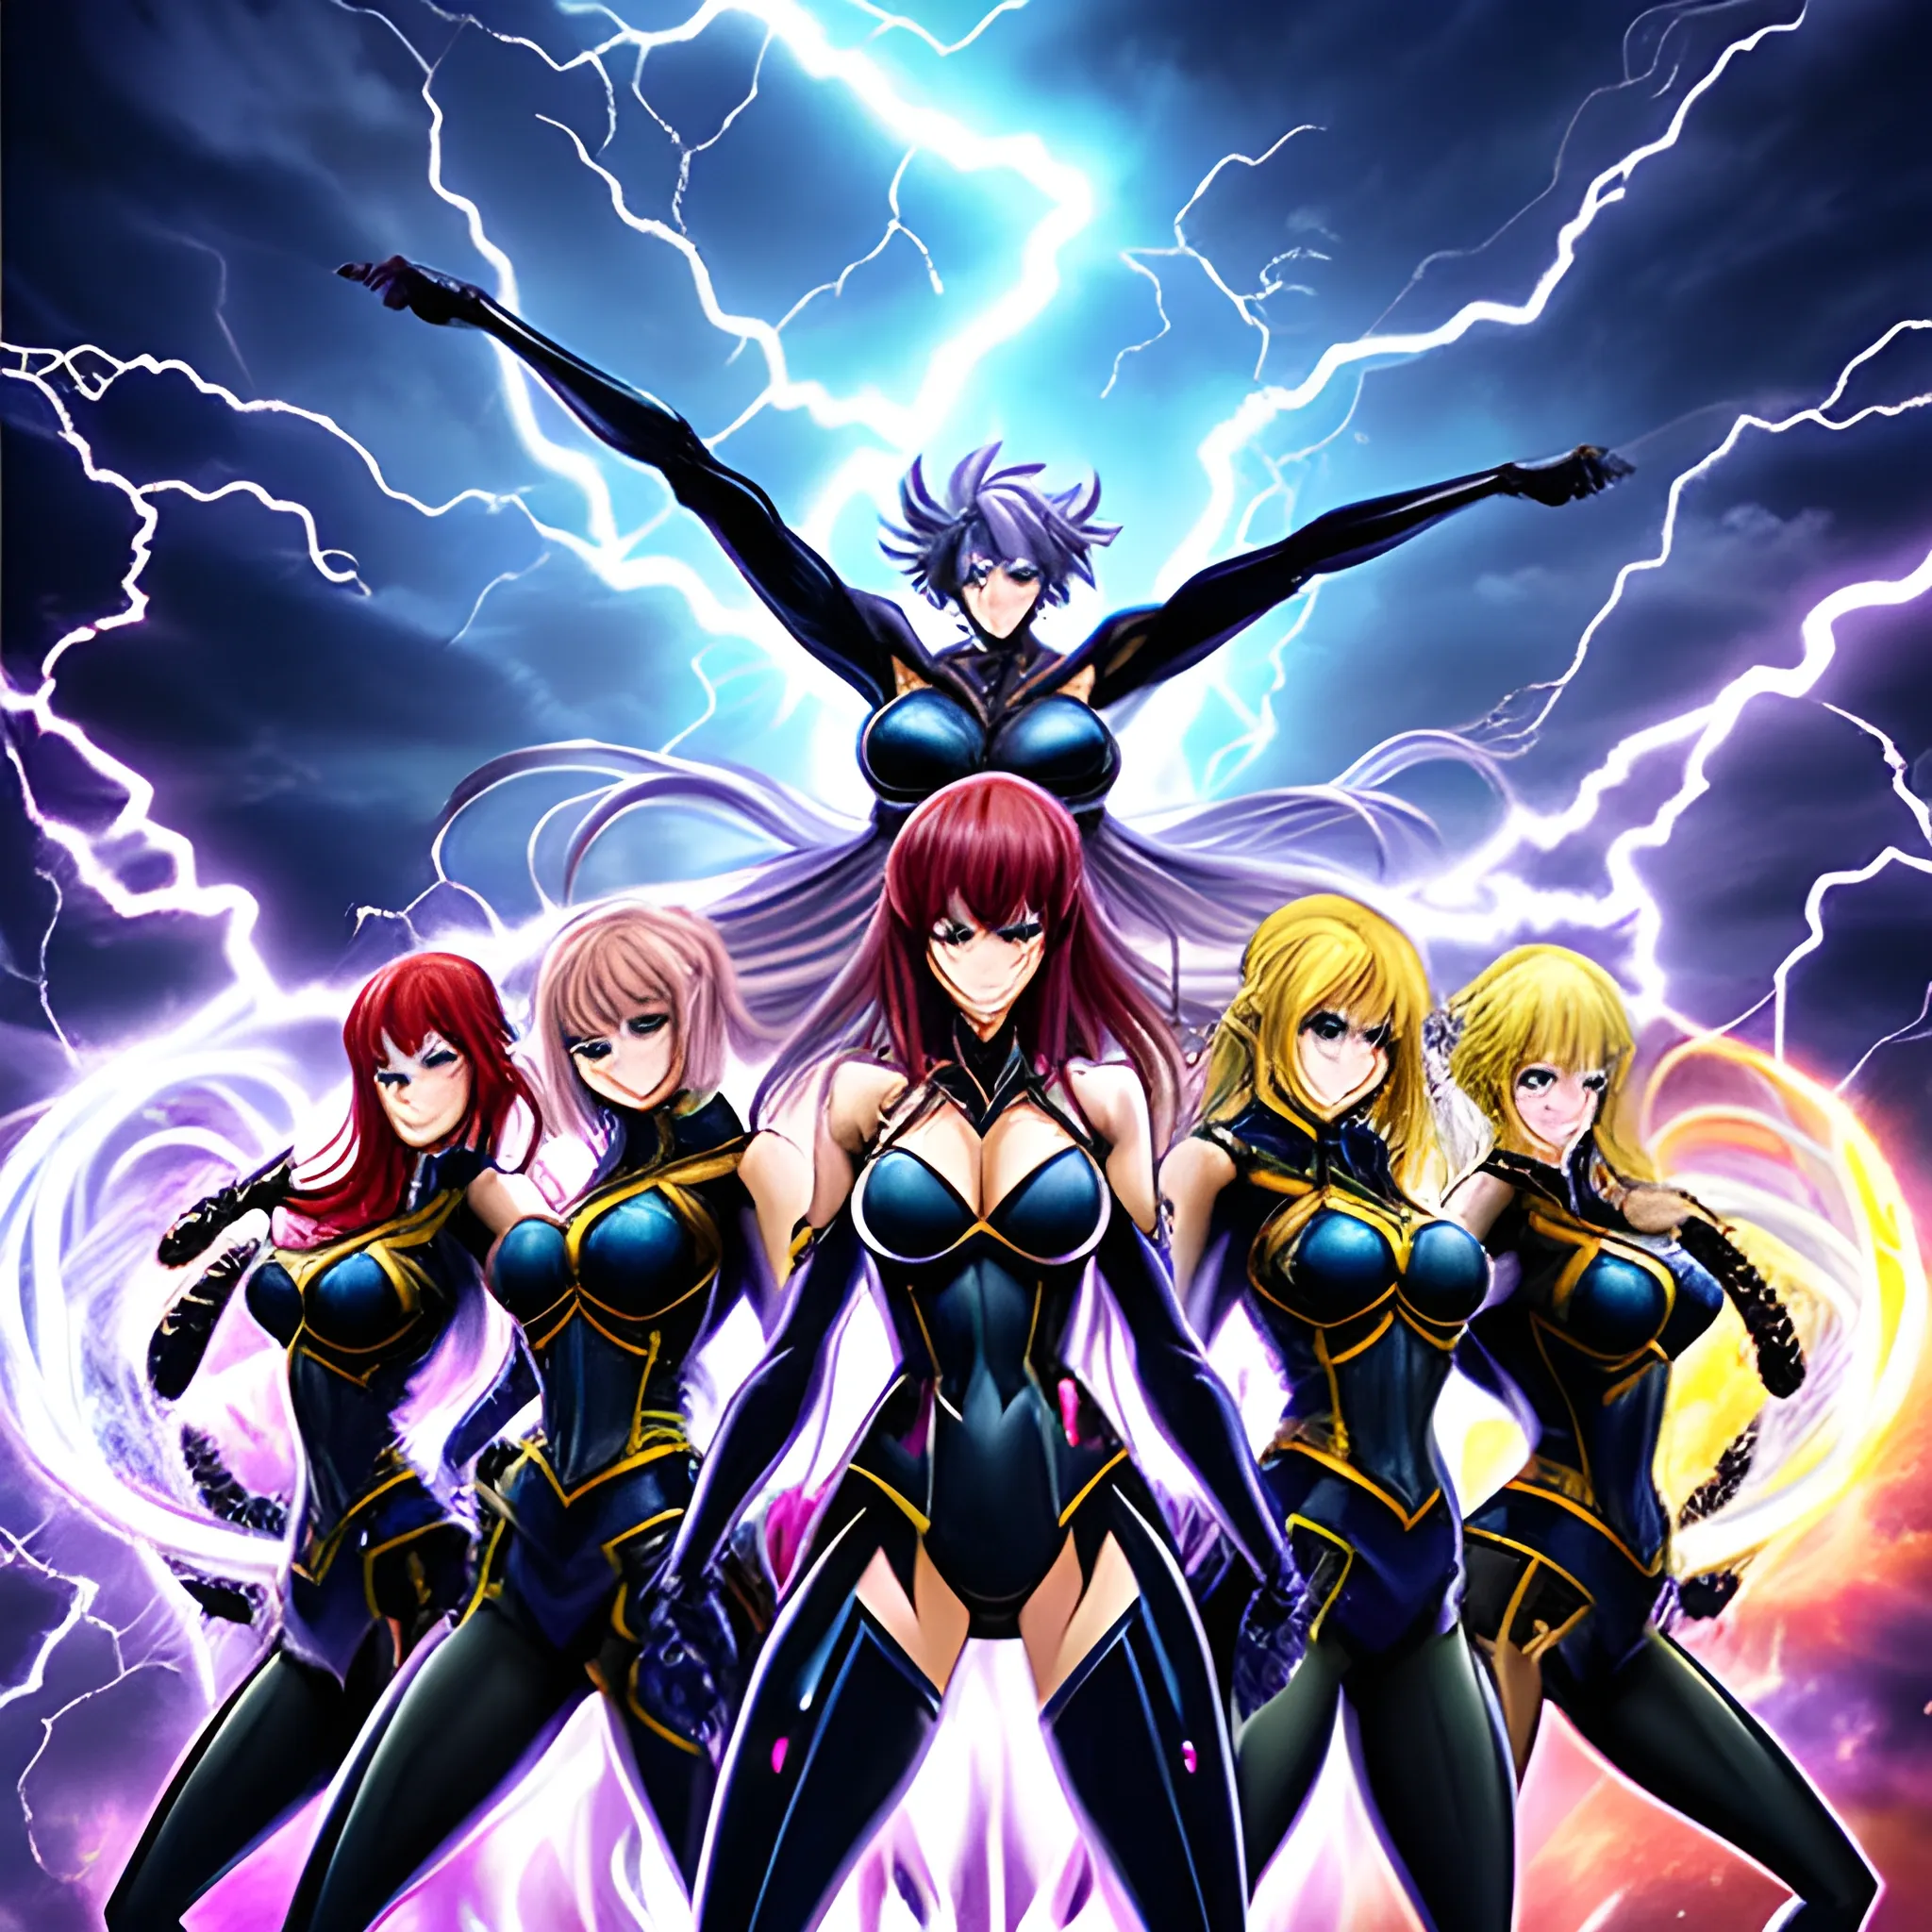 A group of anime girls, each representing a different element, fight for control of a classroom that has been transformed into a mystical battleground, with swirling winds and crackling lightning adding to the intensity of the scene.